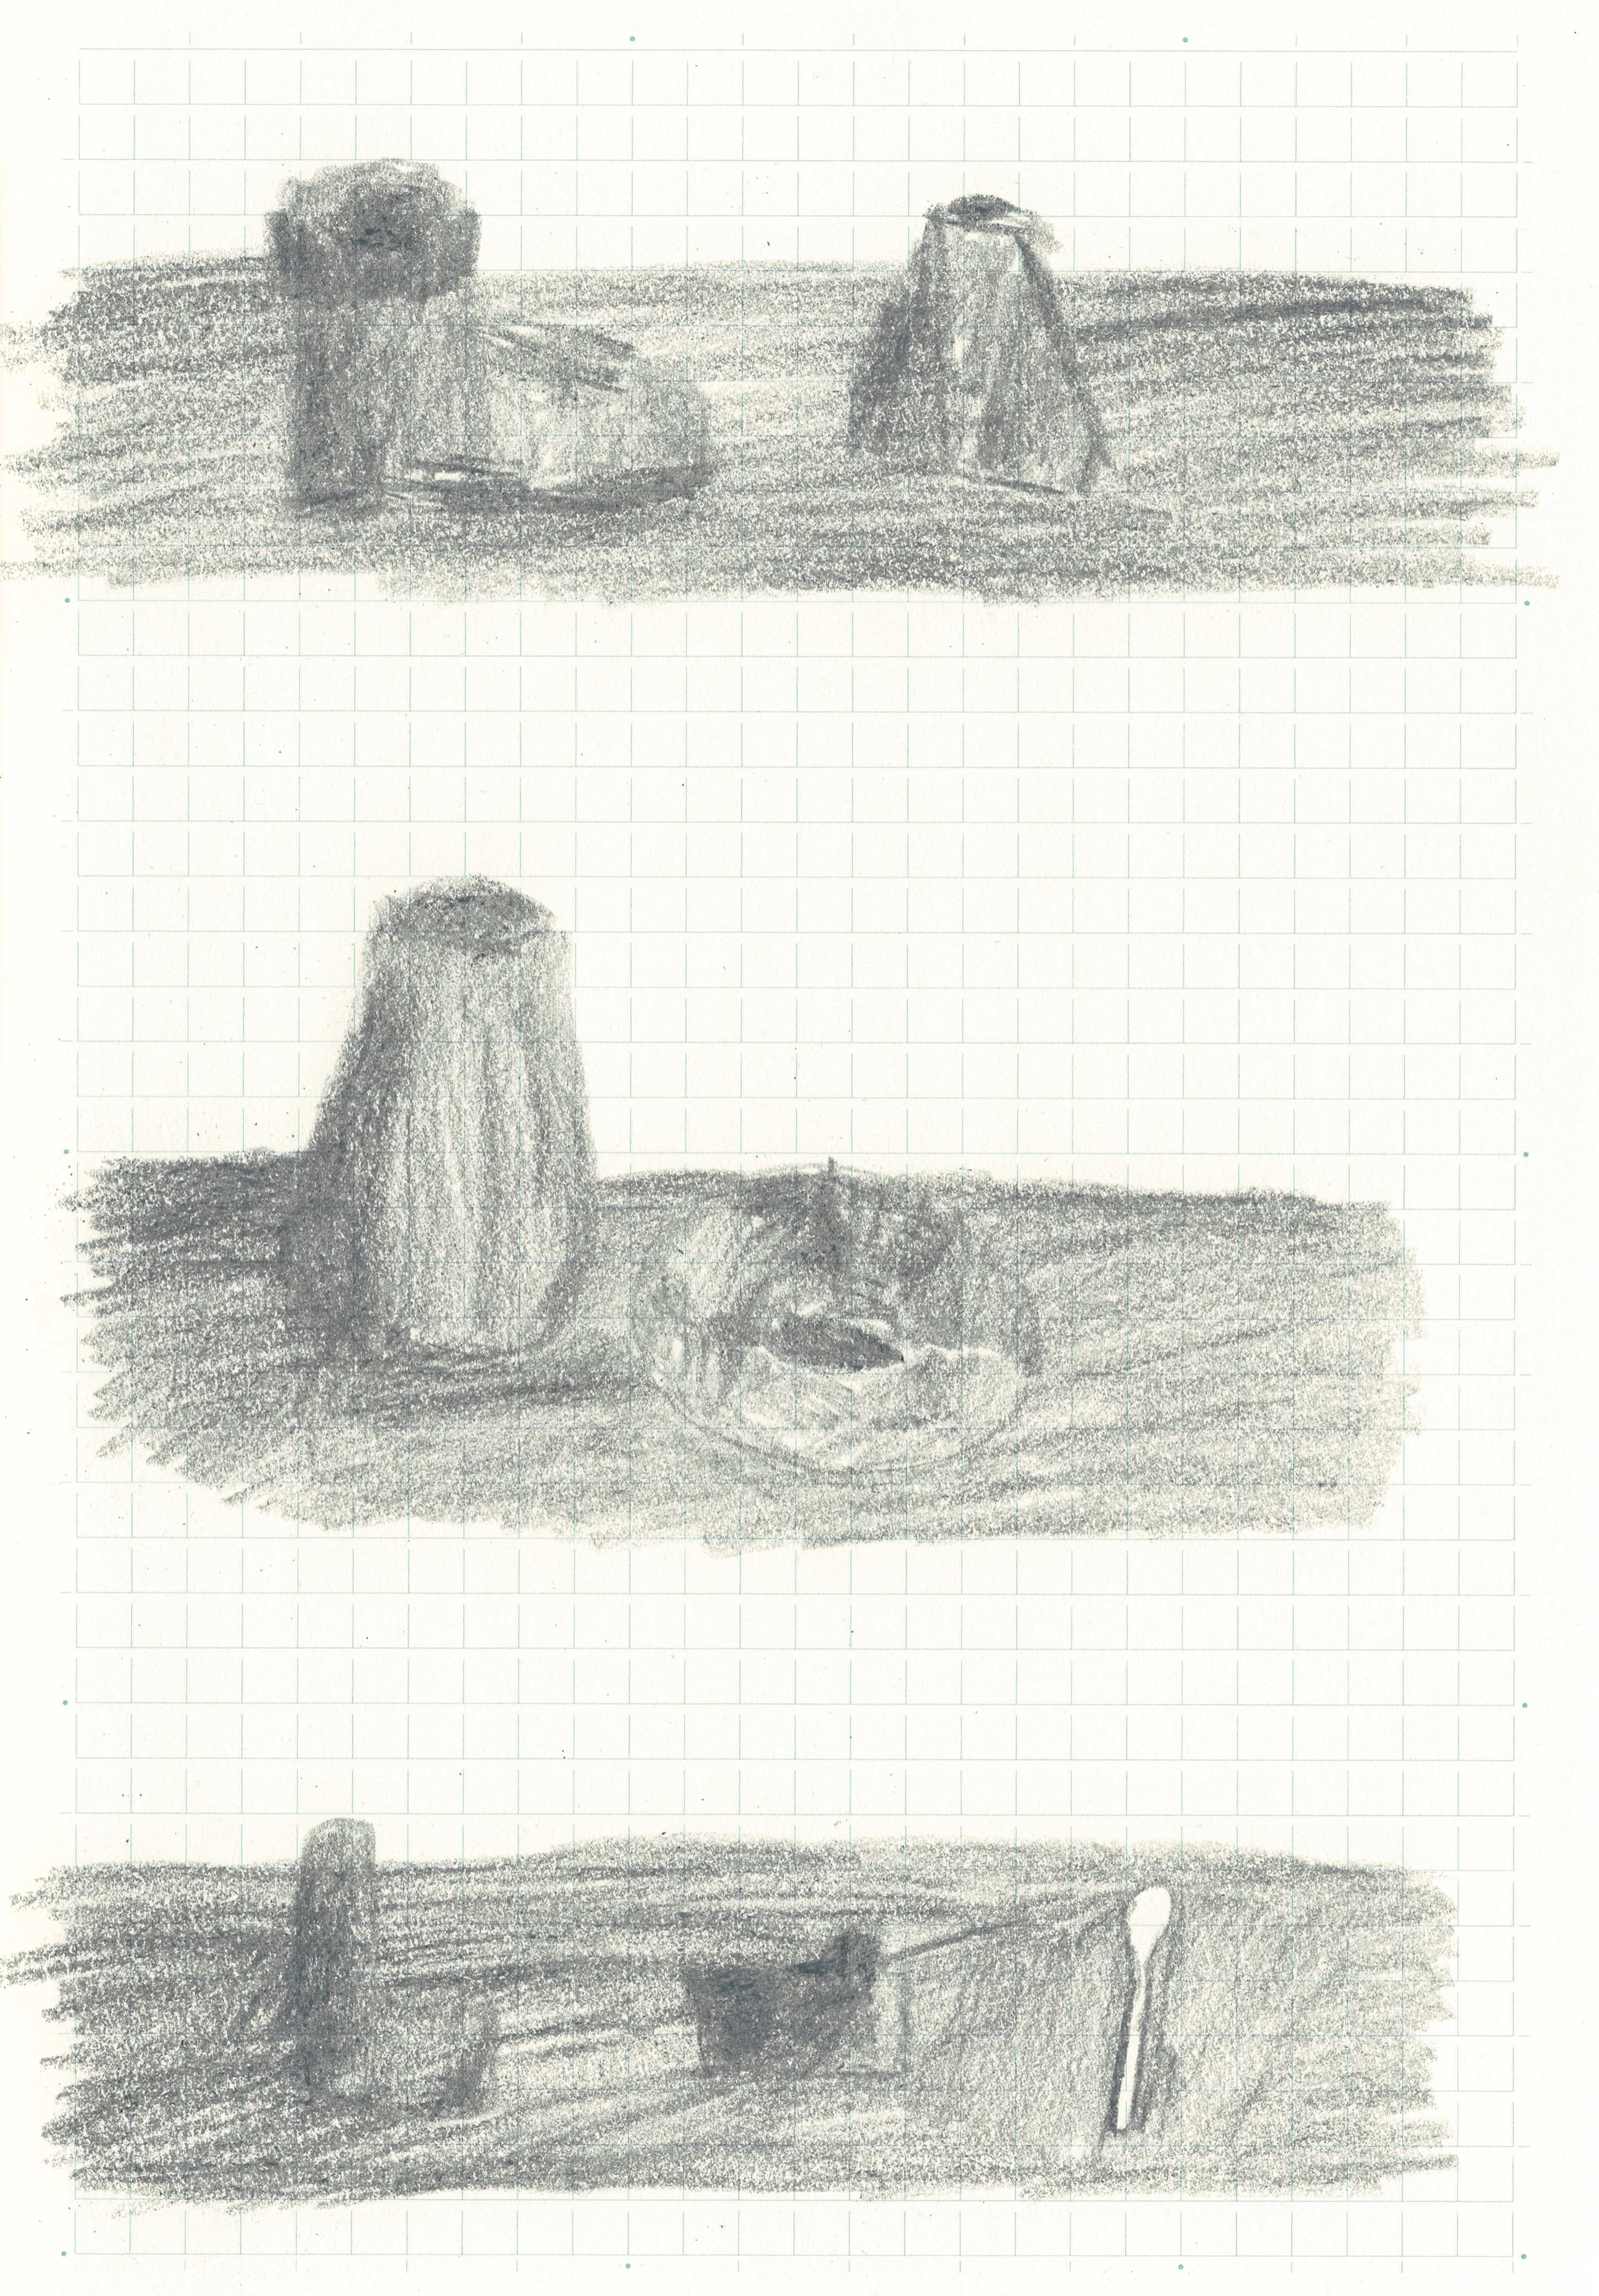 three small still-life sketches in pencil float on a page, one with a boot and a metronome, one with a vase and a plate, and one of two mysterious objects and a spoon